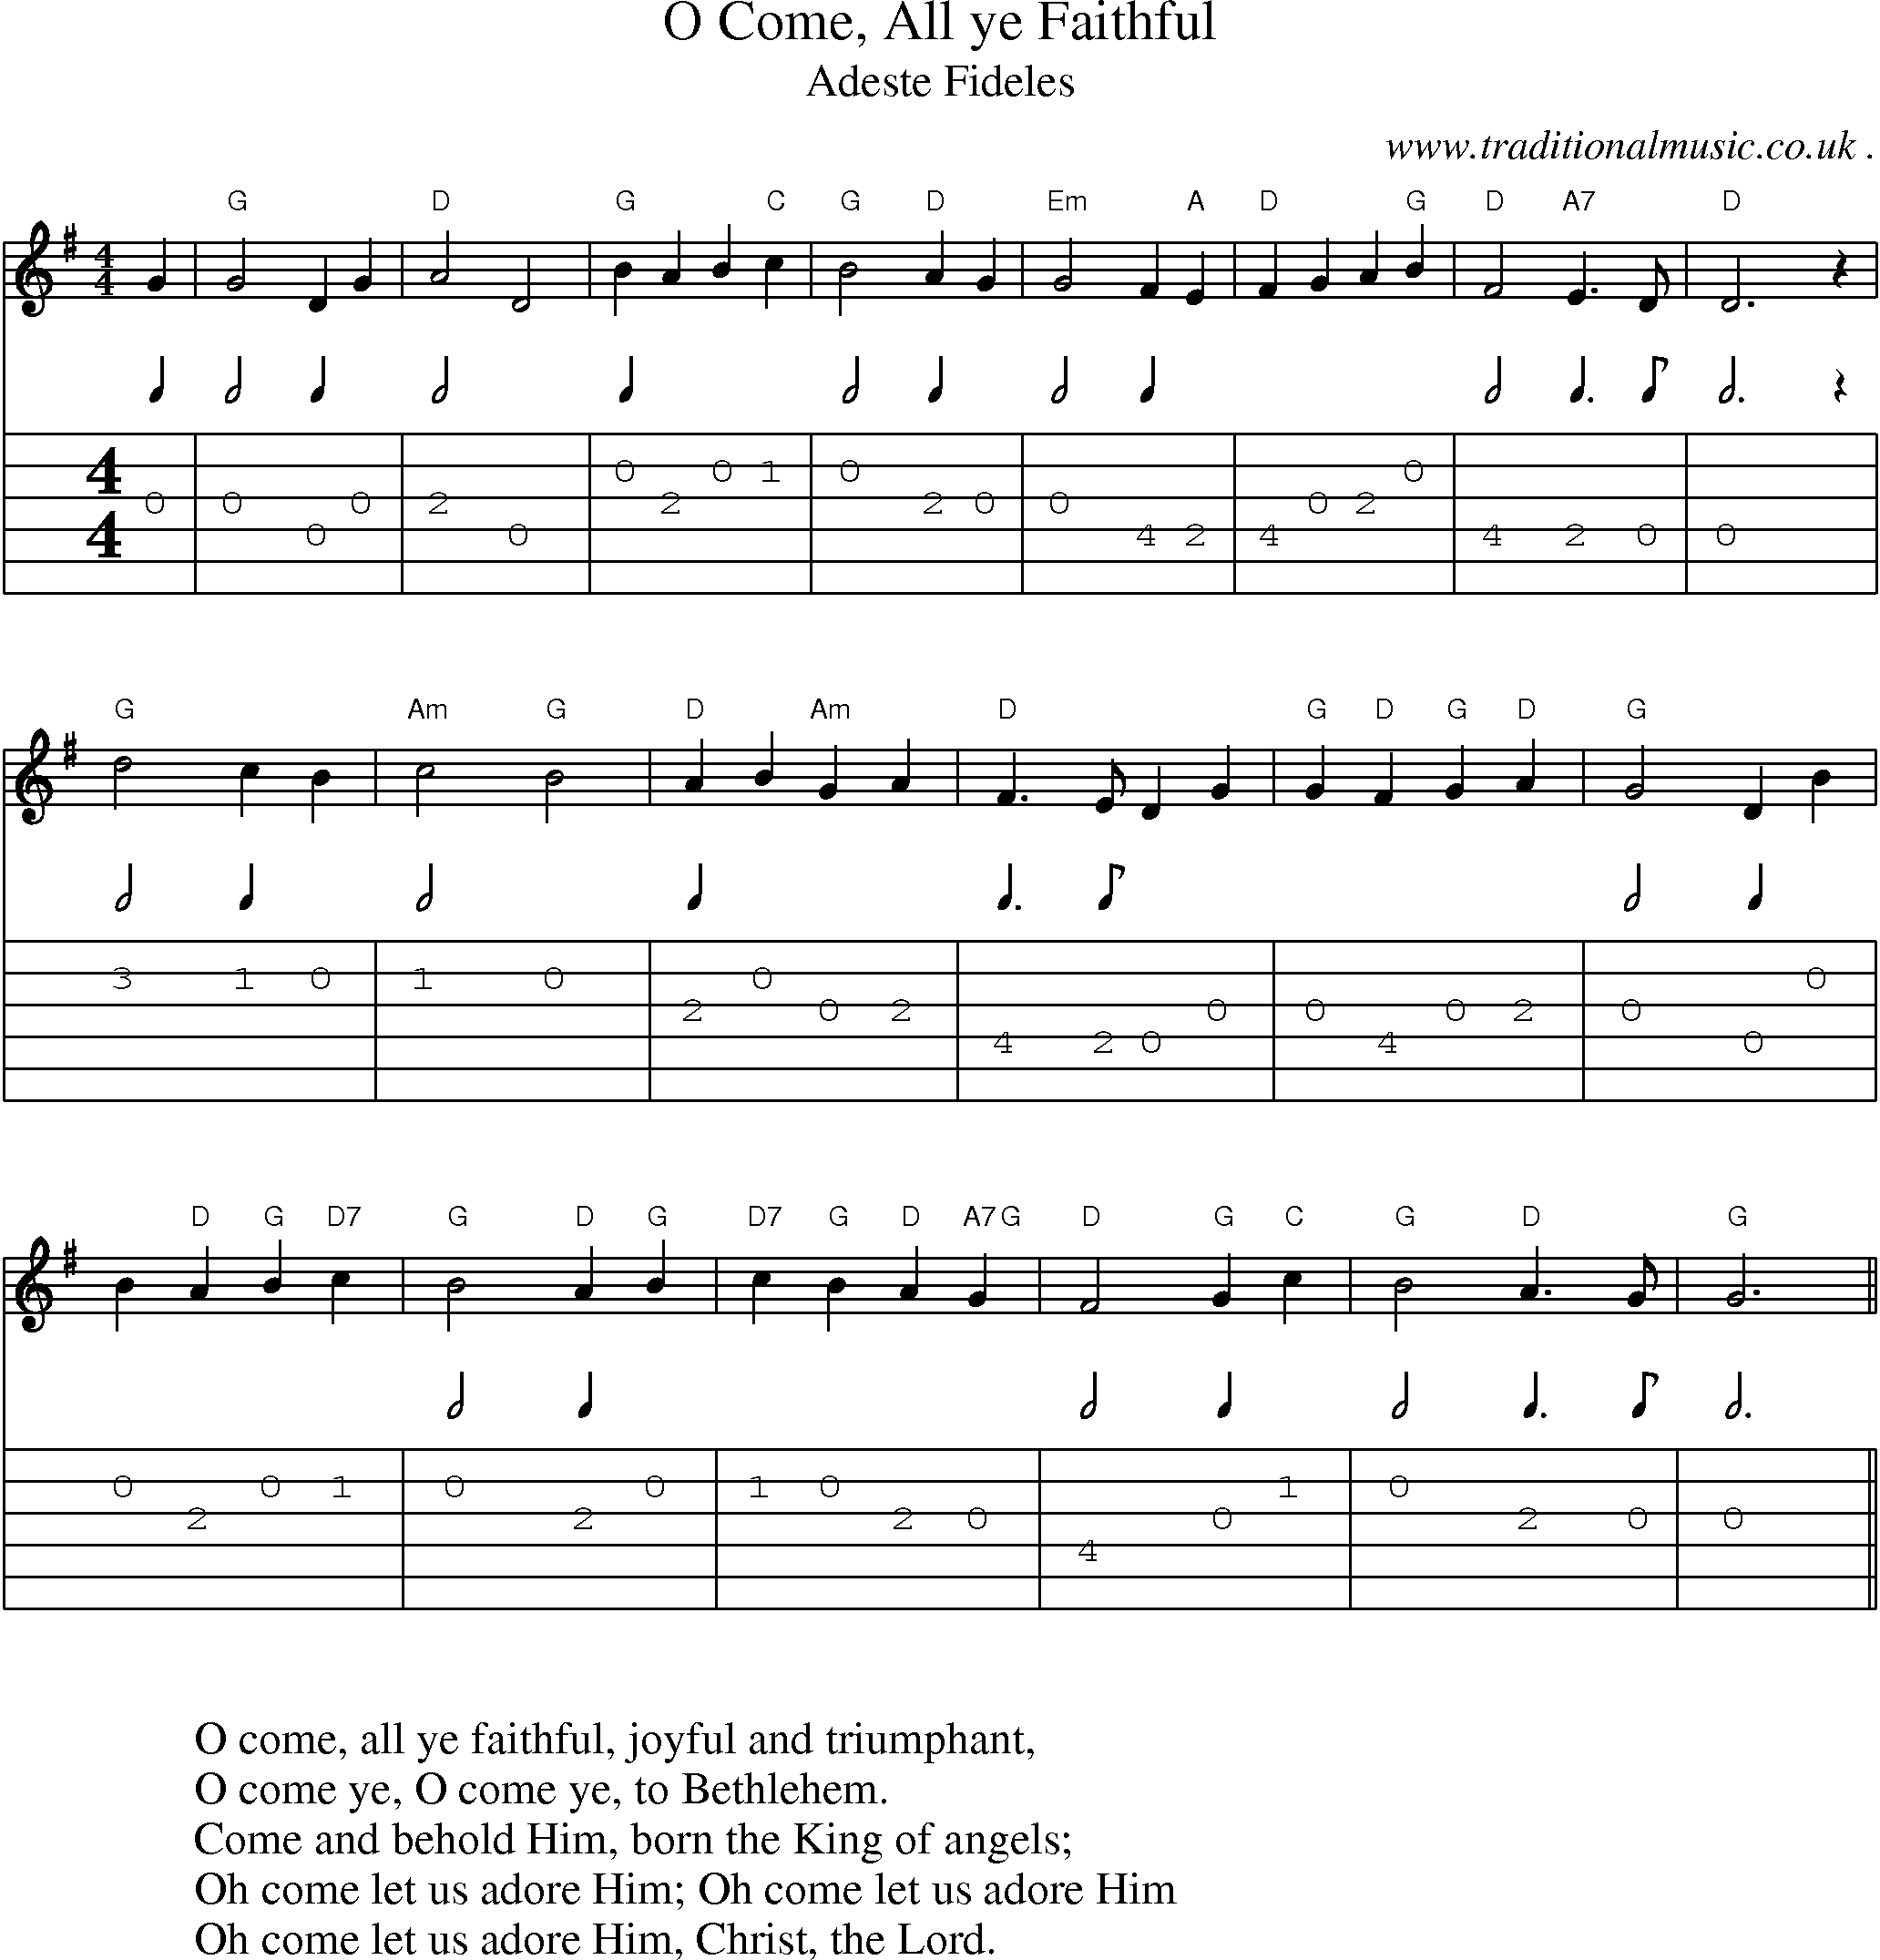 Music Score and Guitar Tabs for O Come All ye Faithful